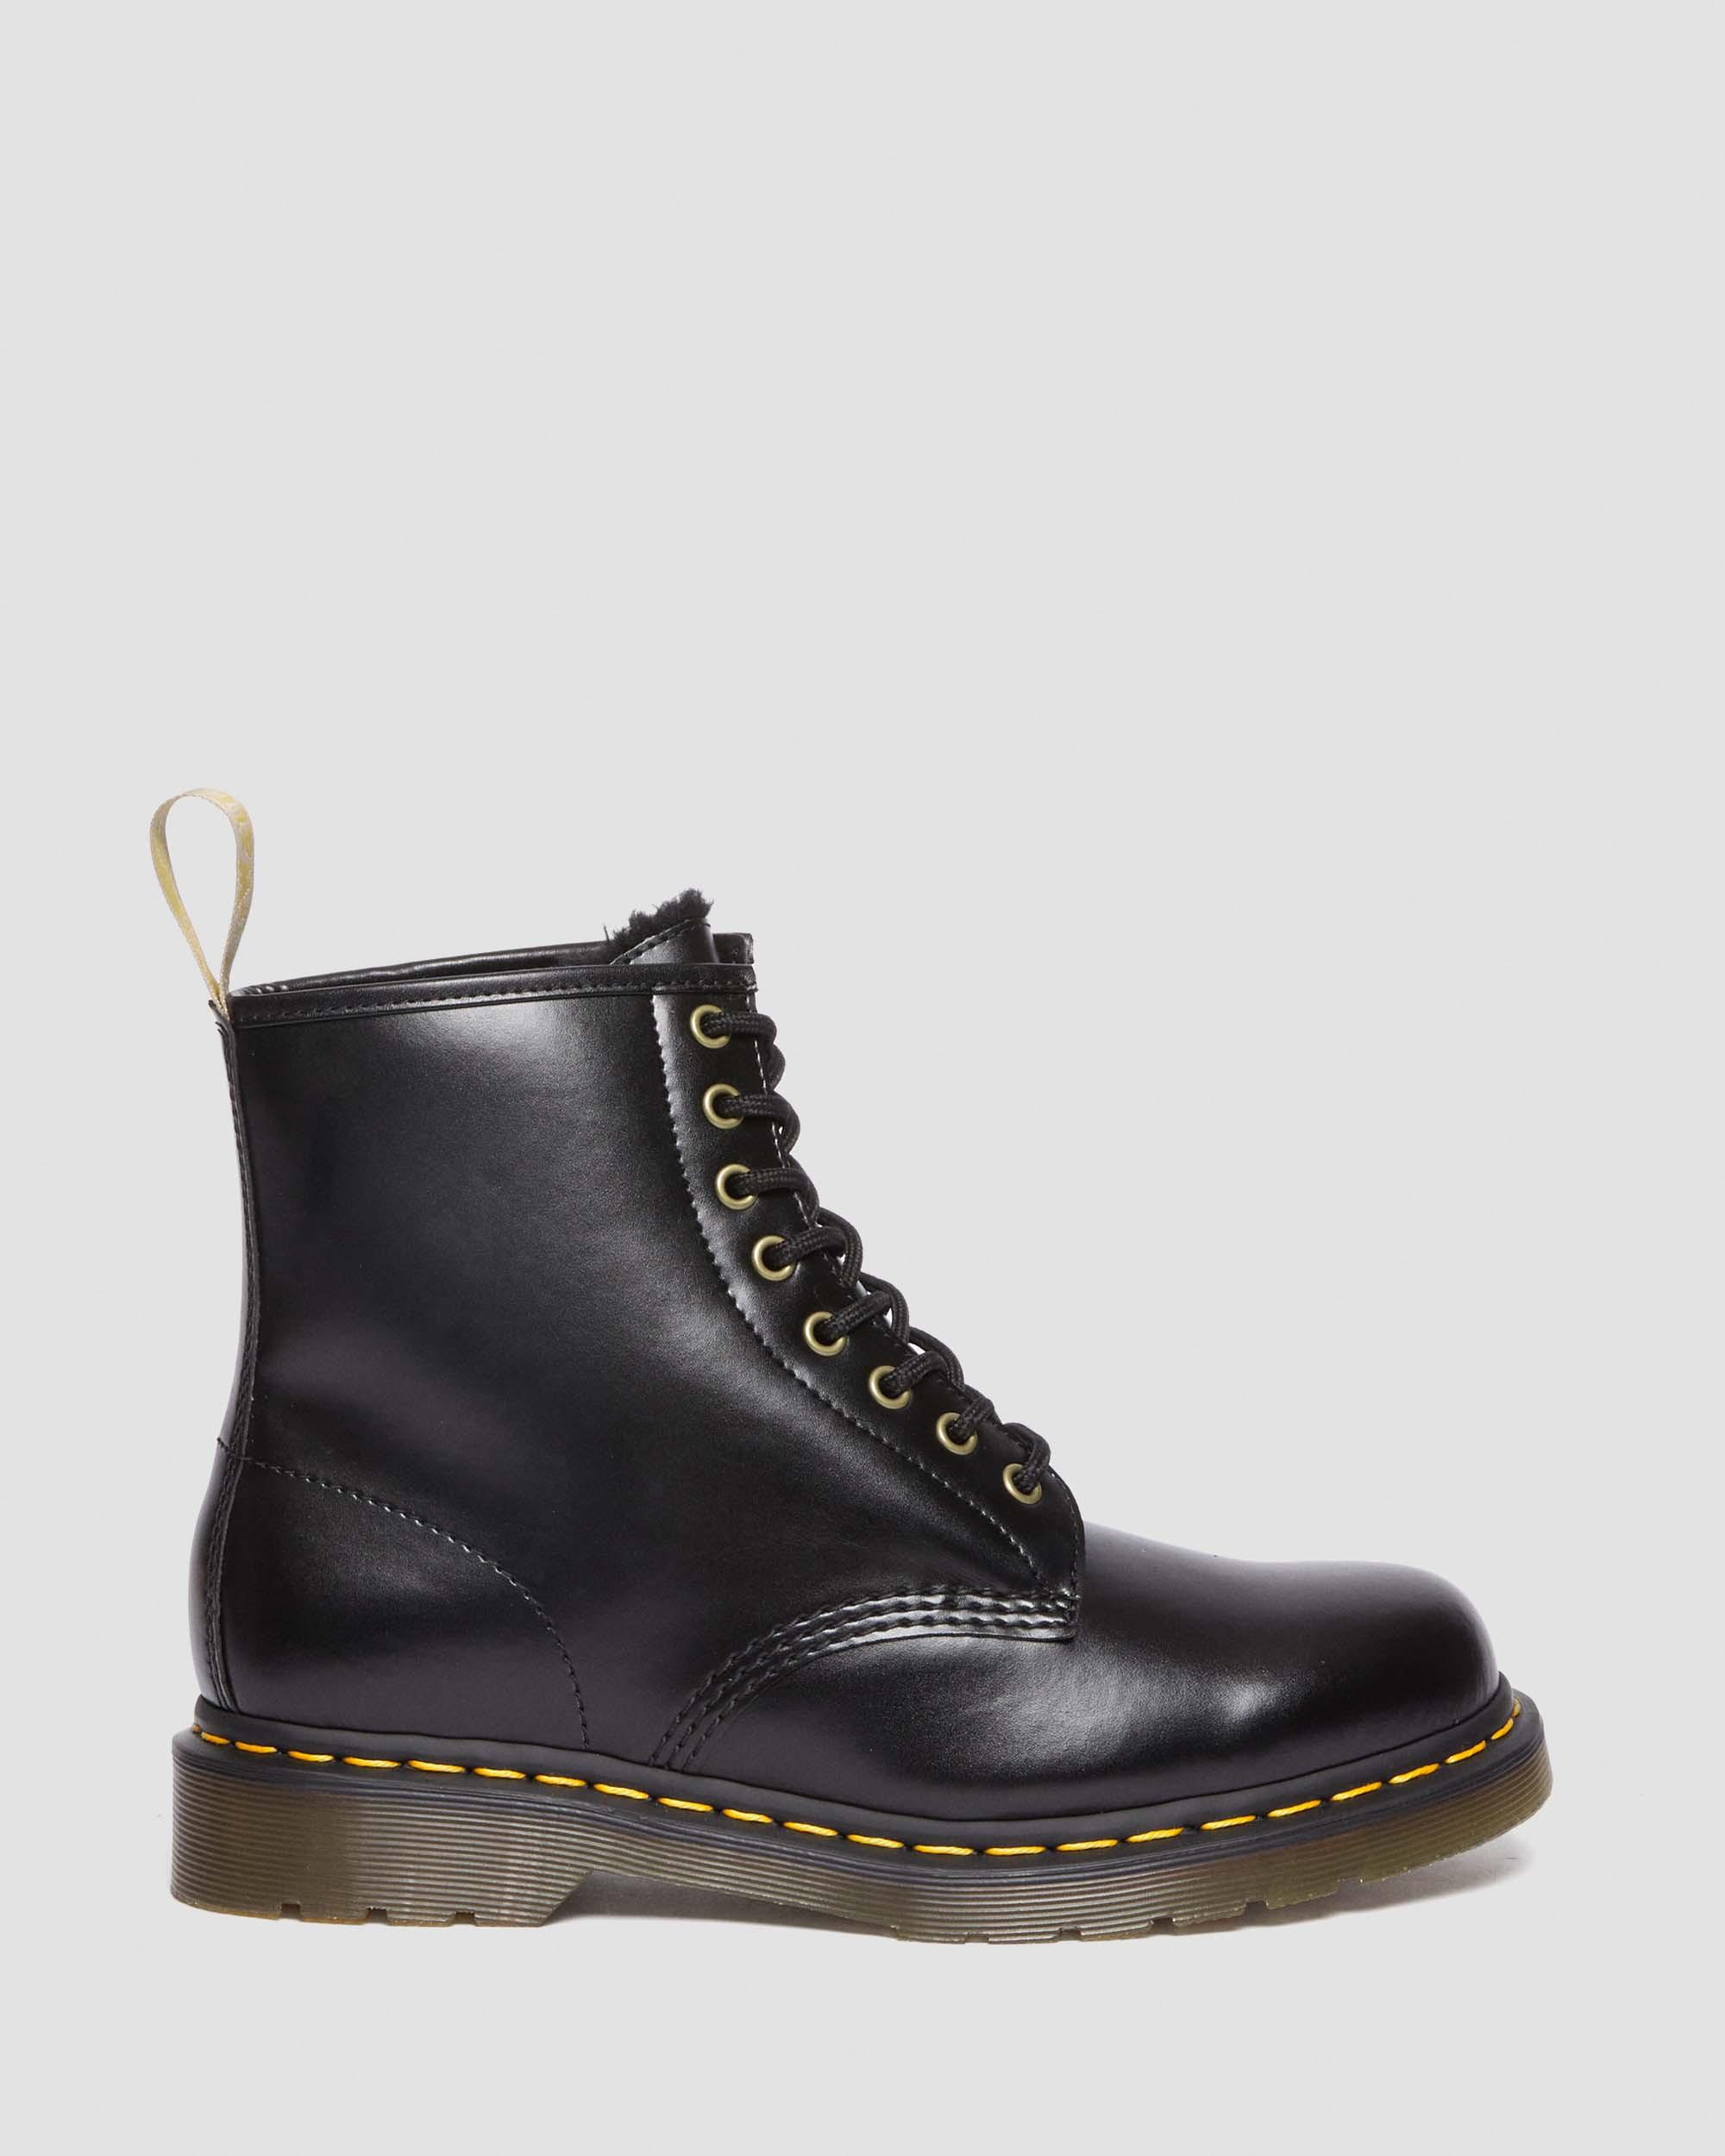 Vegan 1460 Borg Lined Lace Up Boots in Black | Dr. Martens